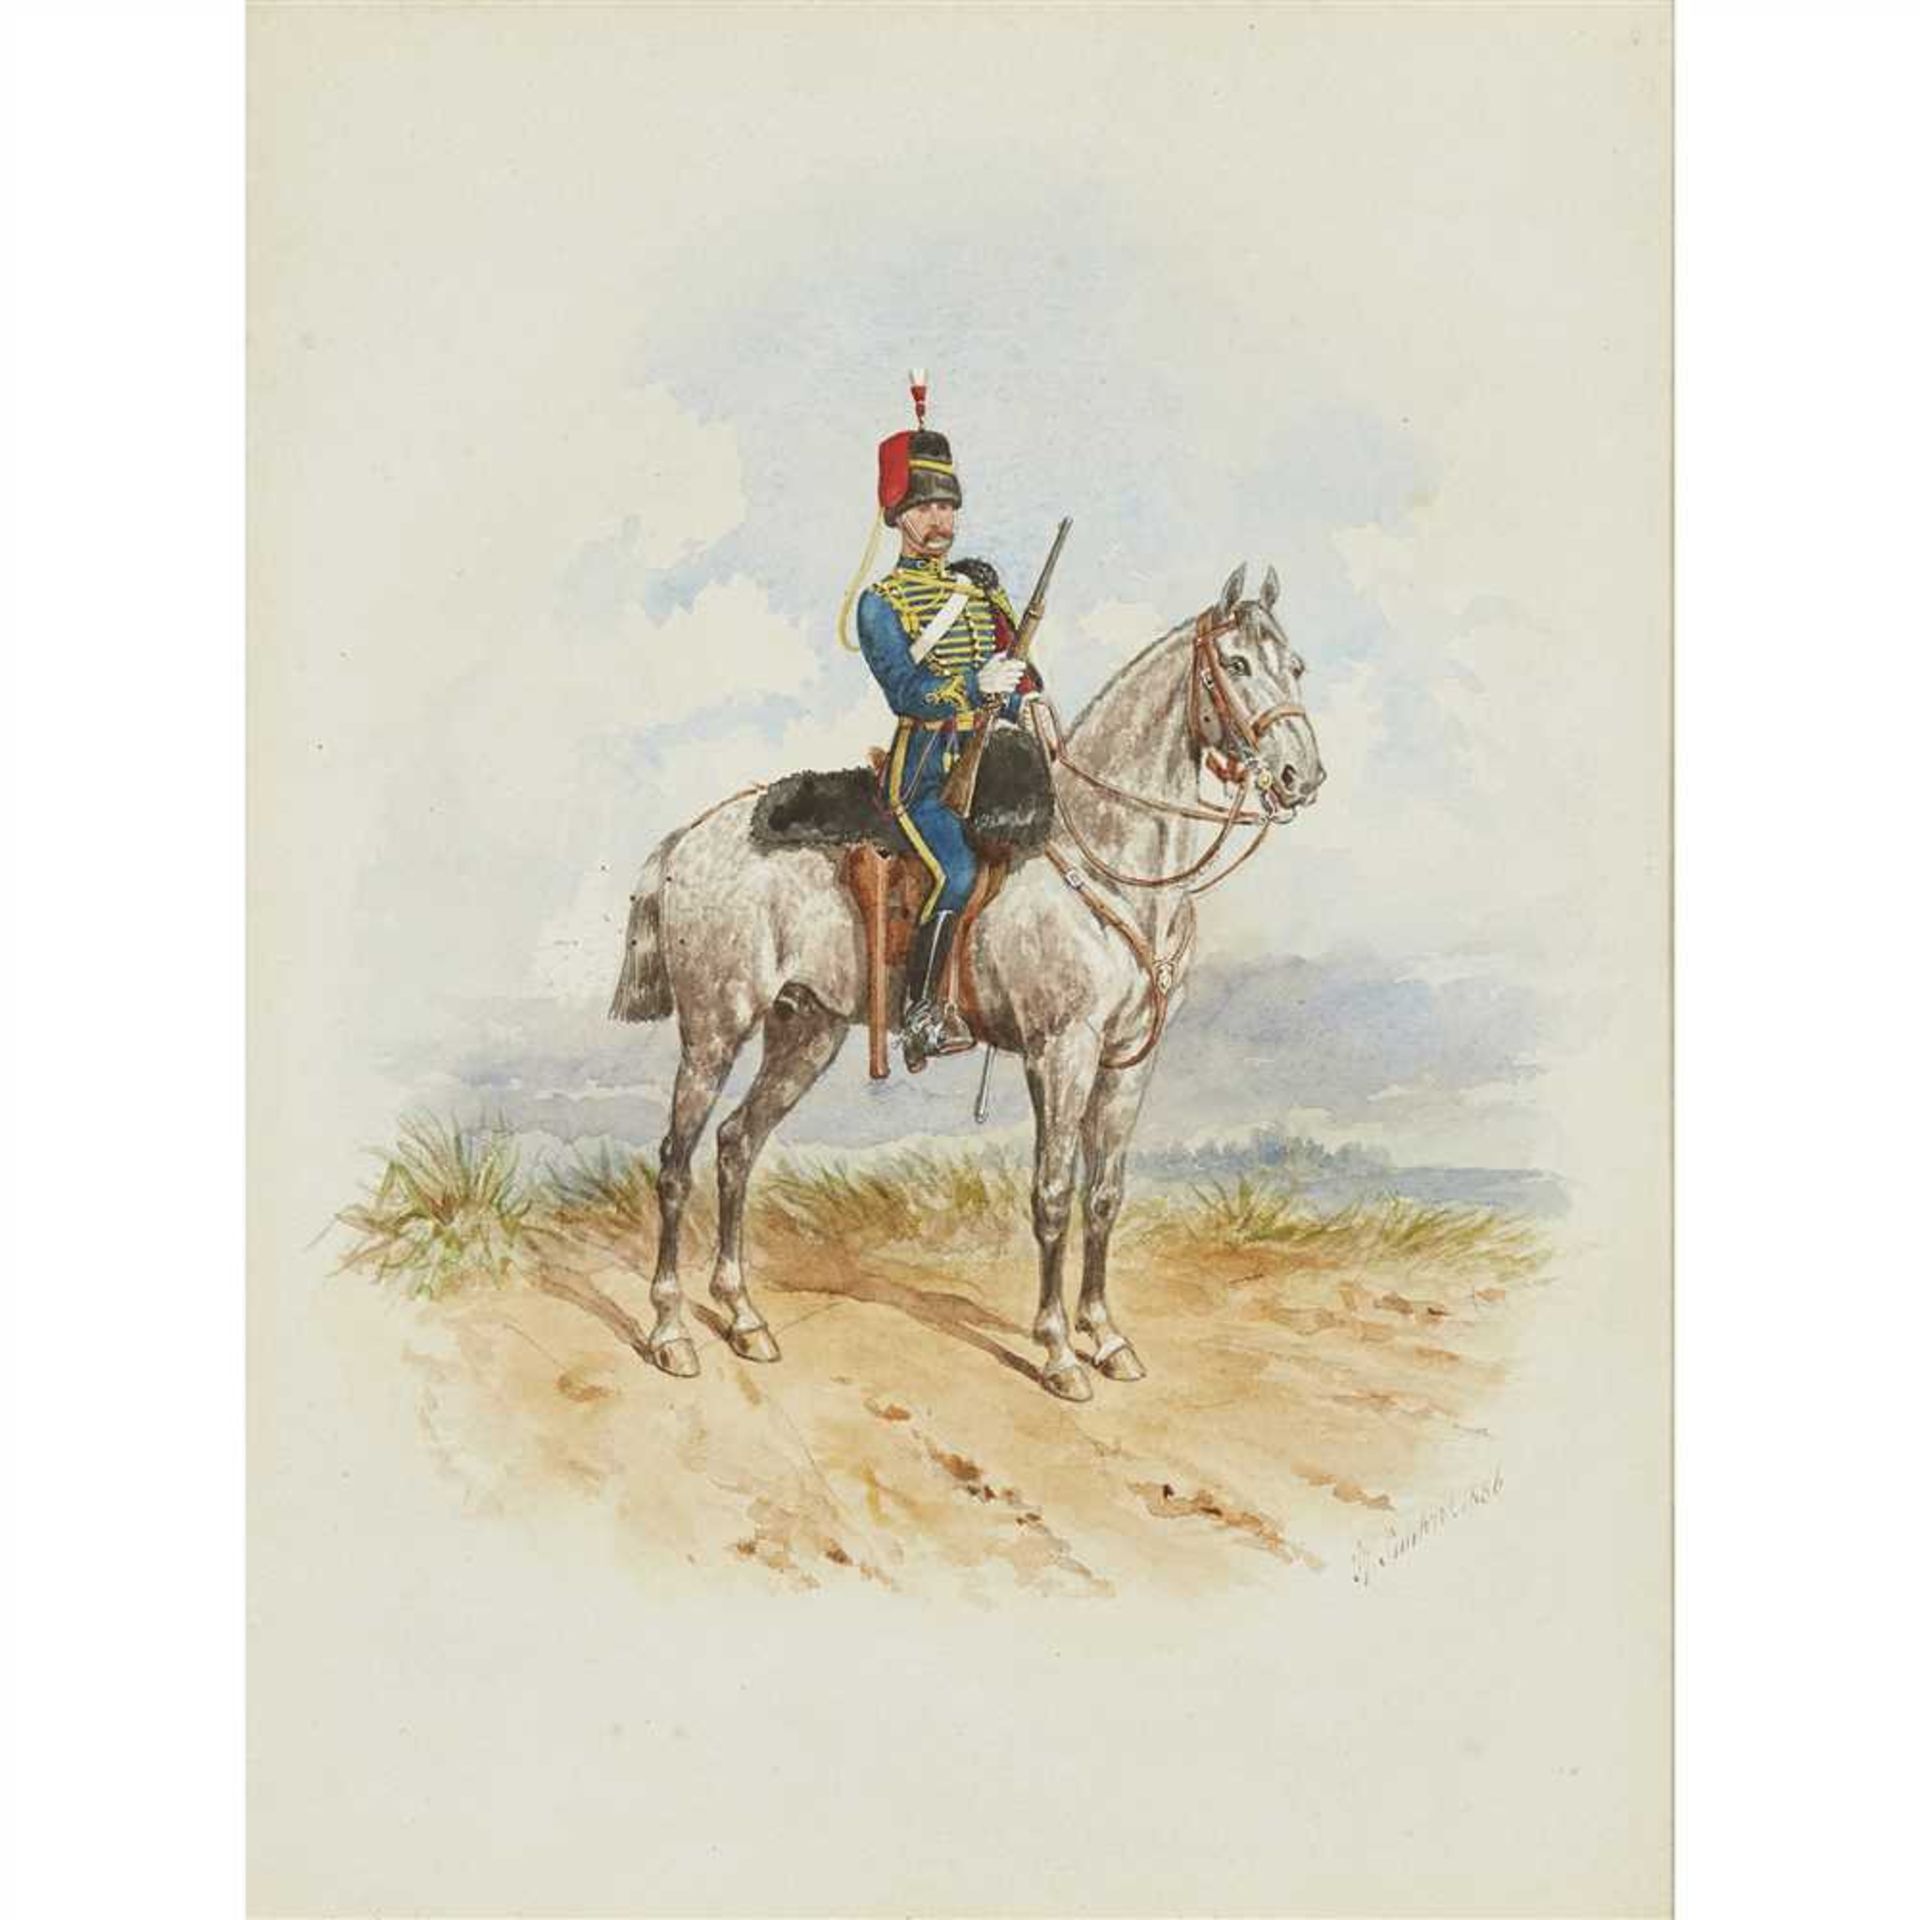 RICHARD SIMKIN (BRITISH 1840-1926) TROOPER Signed and dated 1886, watercolour (Dimensions: 32.5cm